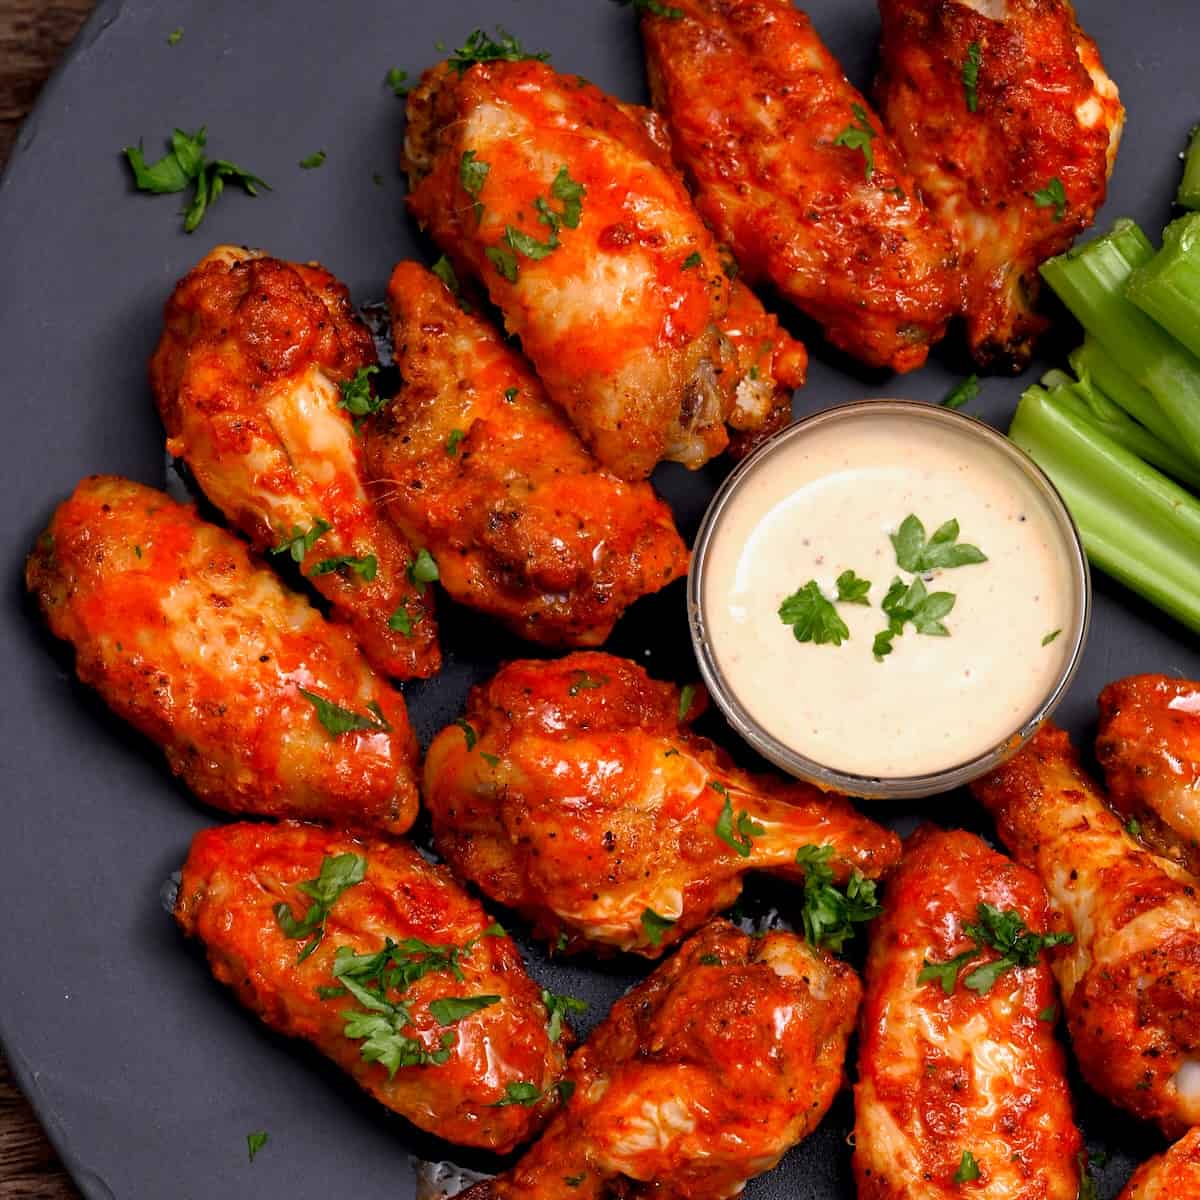 Chicken wings with buffalo sauce and Alabama sauce